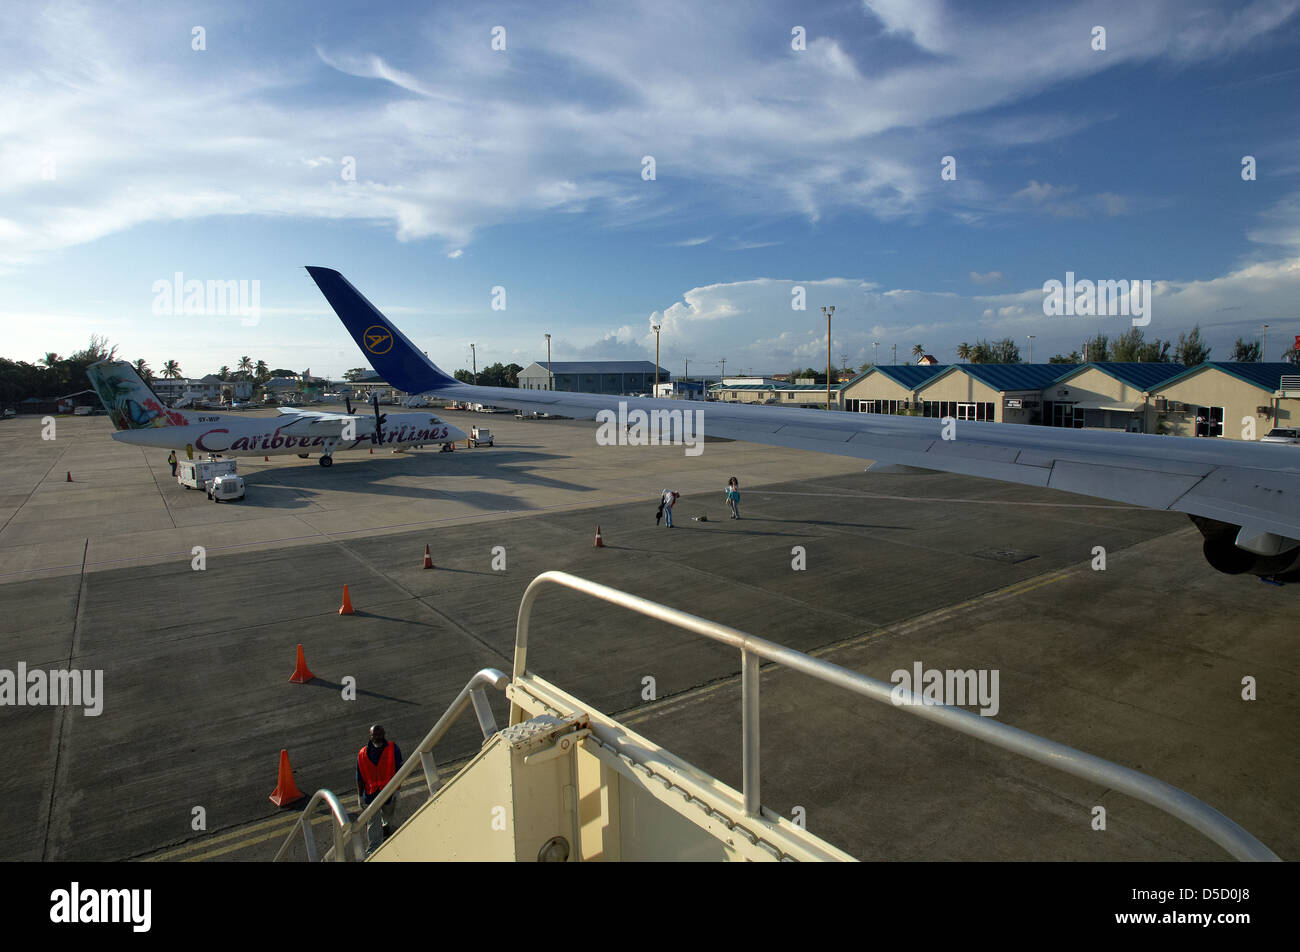 Crown Point, Trinidad and Tobago, view from a gangway on the tarmac of the airport Stock Photo